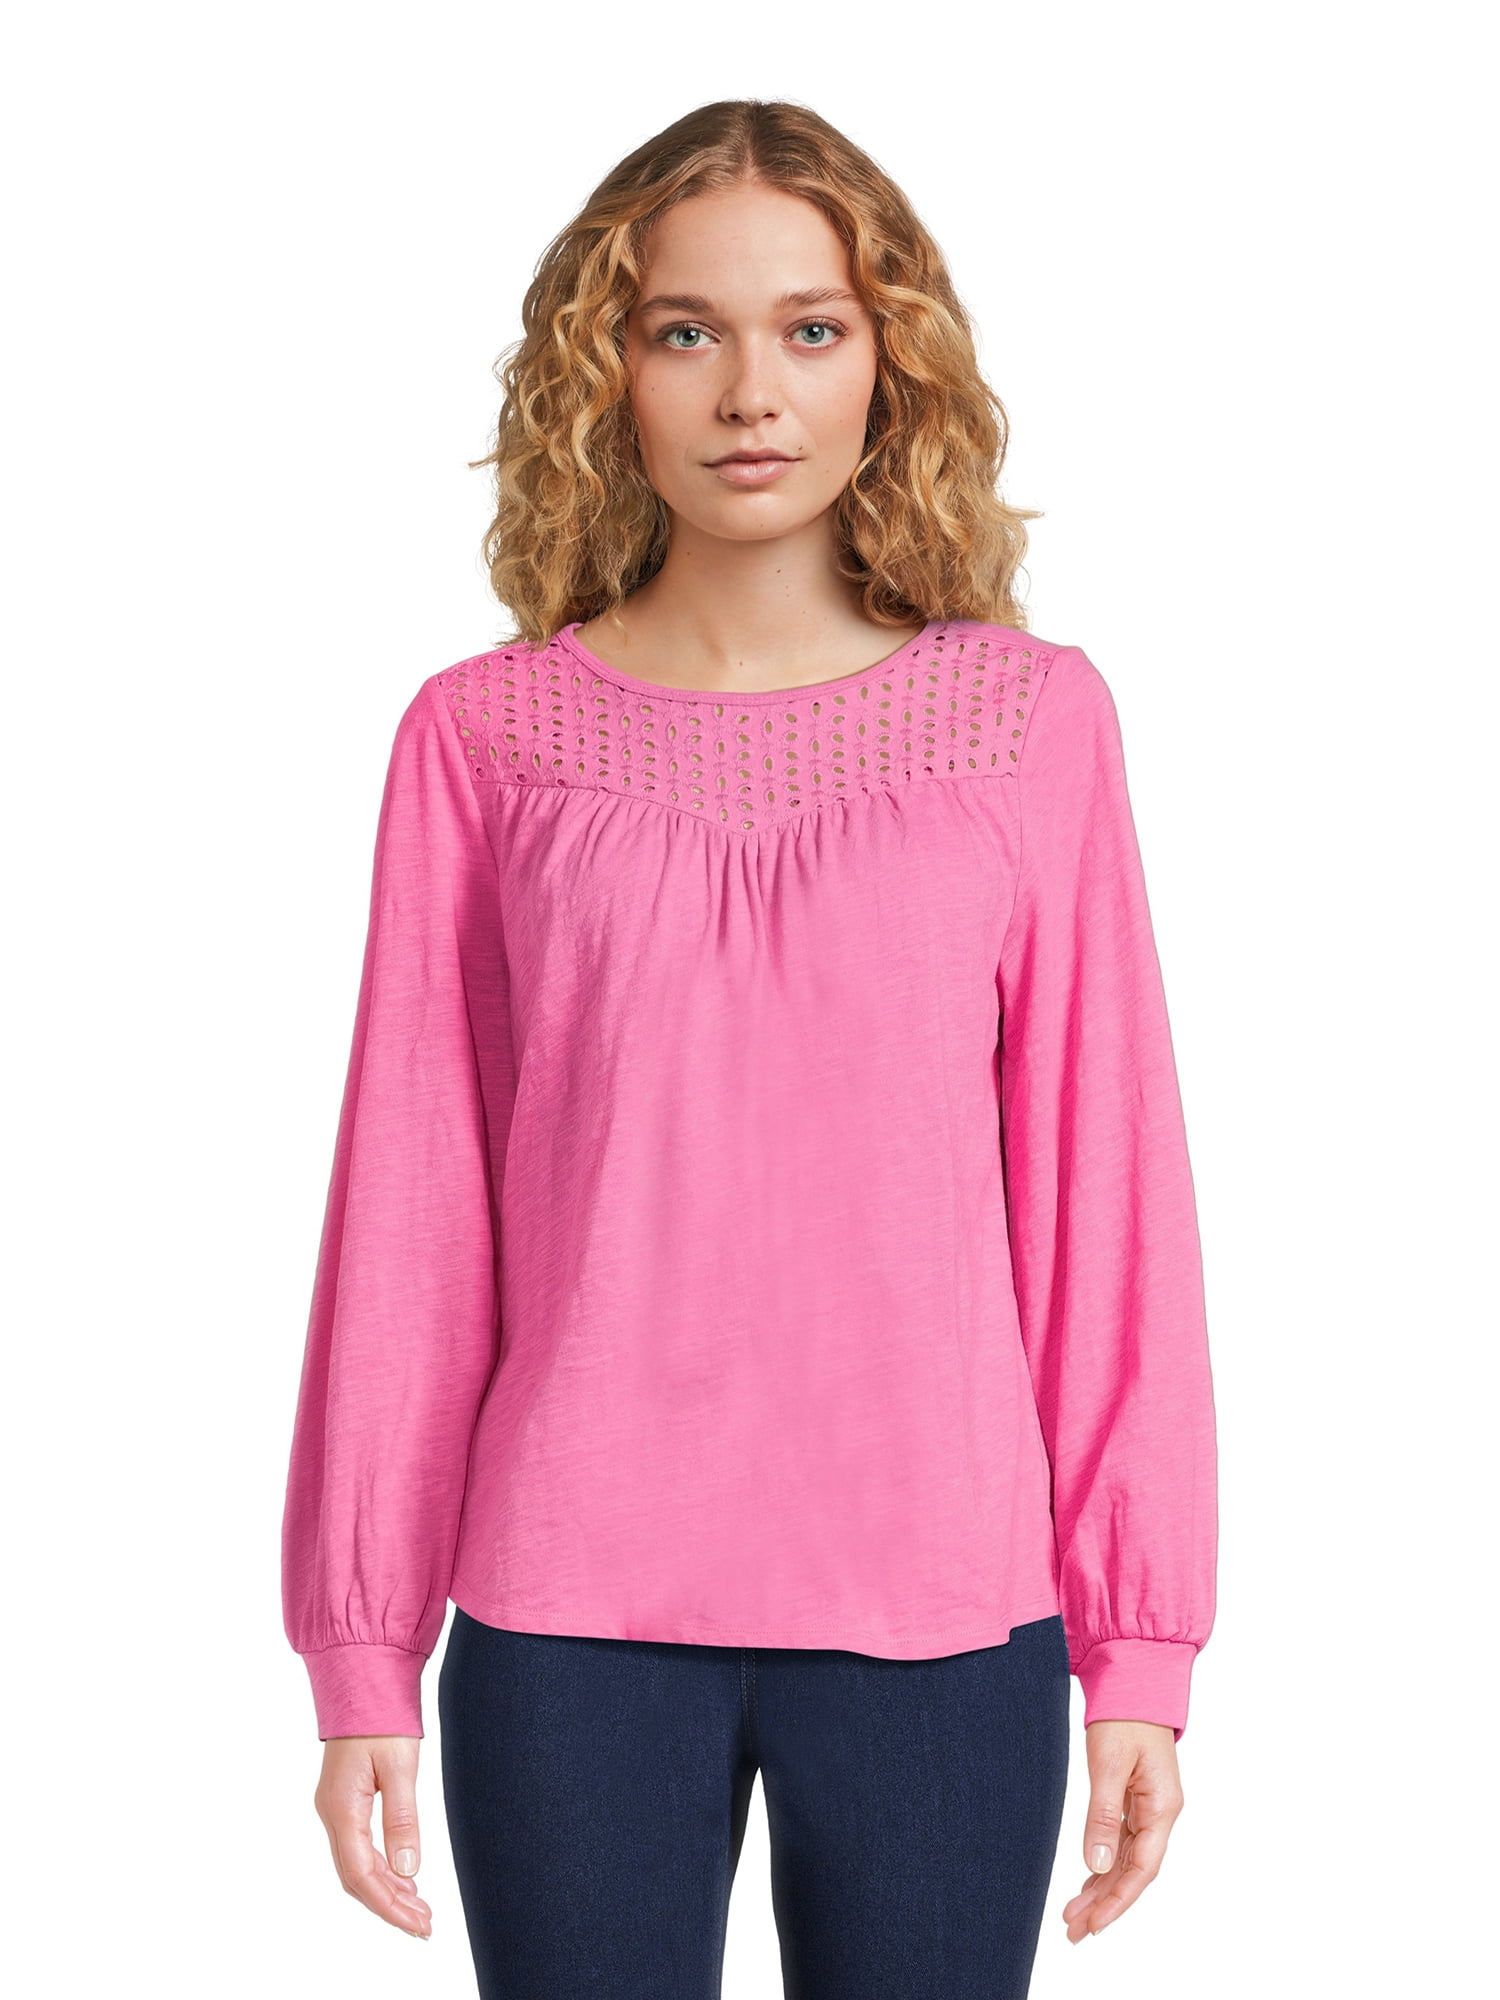 Time and Tru Women's Eyelet Top with Long Sleeves, Sizes XS-XXXL ...